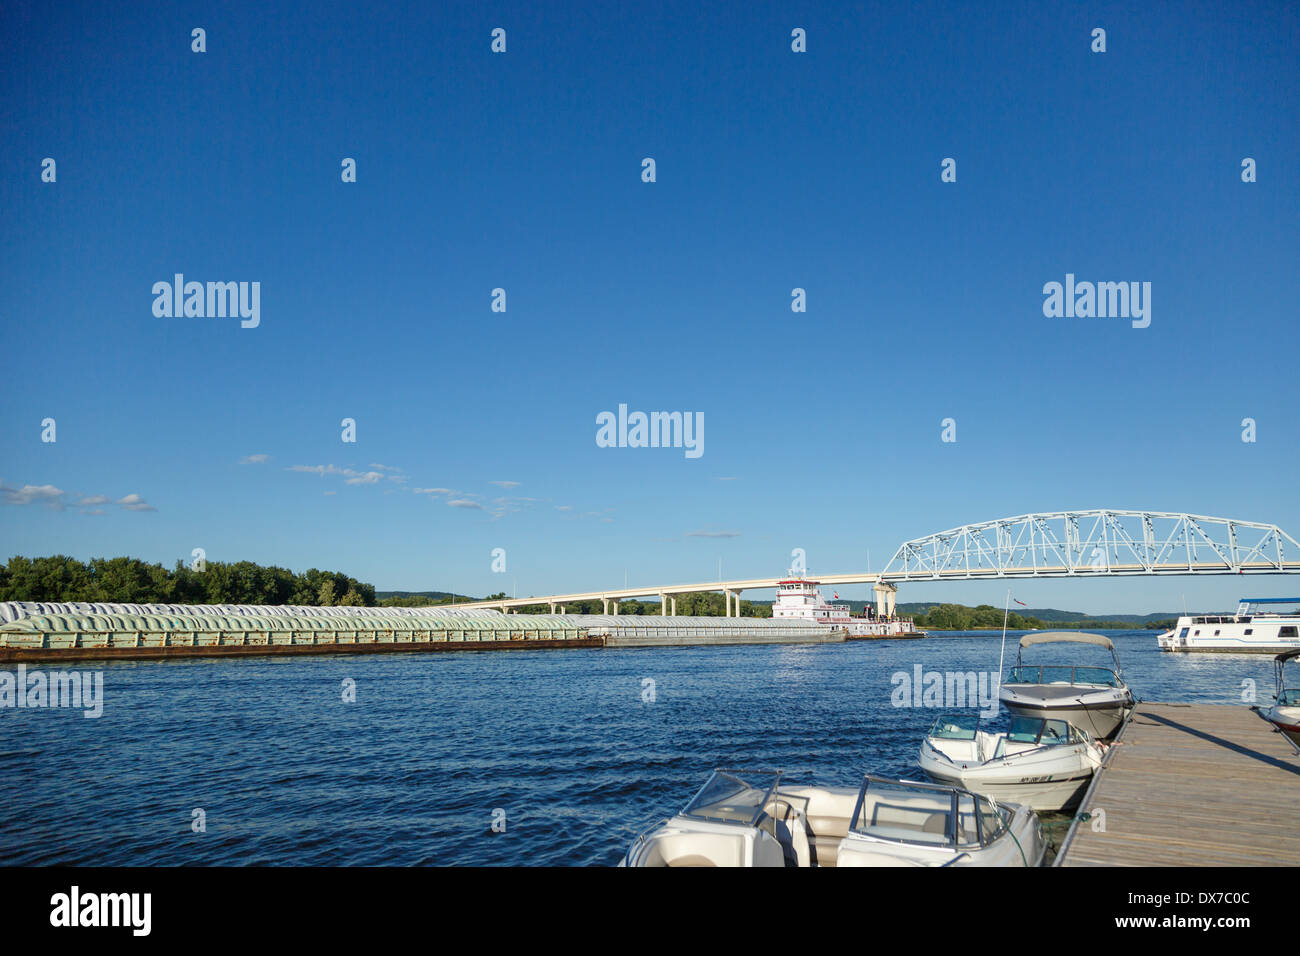 Grain barges pushed upstream on Mississippi River in Wabasha, MN. Stock Photo